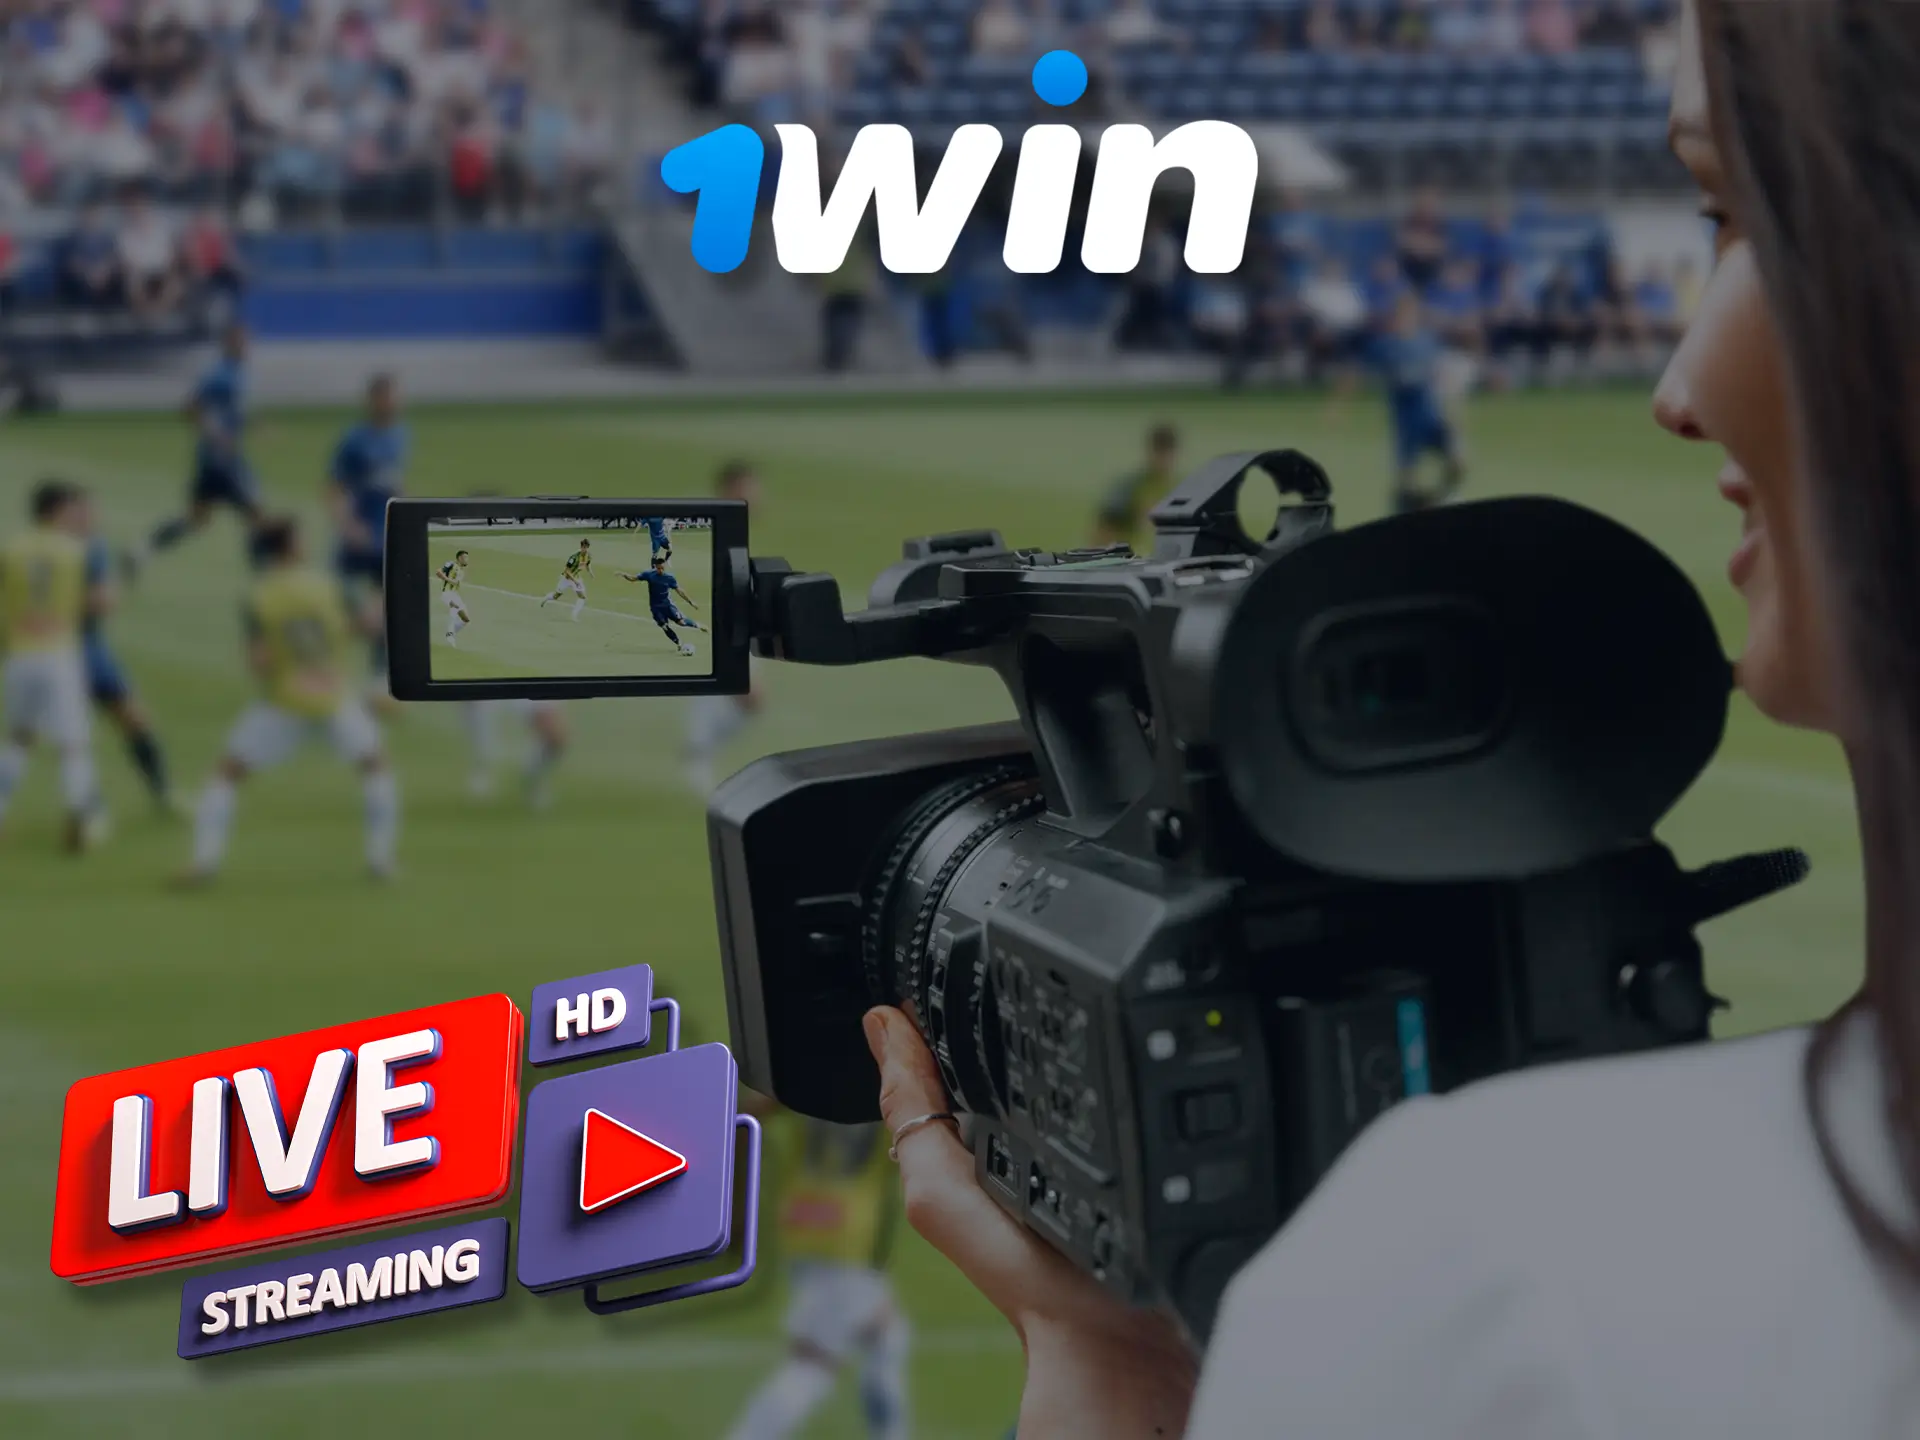 Watch live sports matches in good quality directly on 1Win.